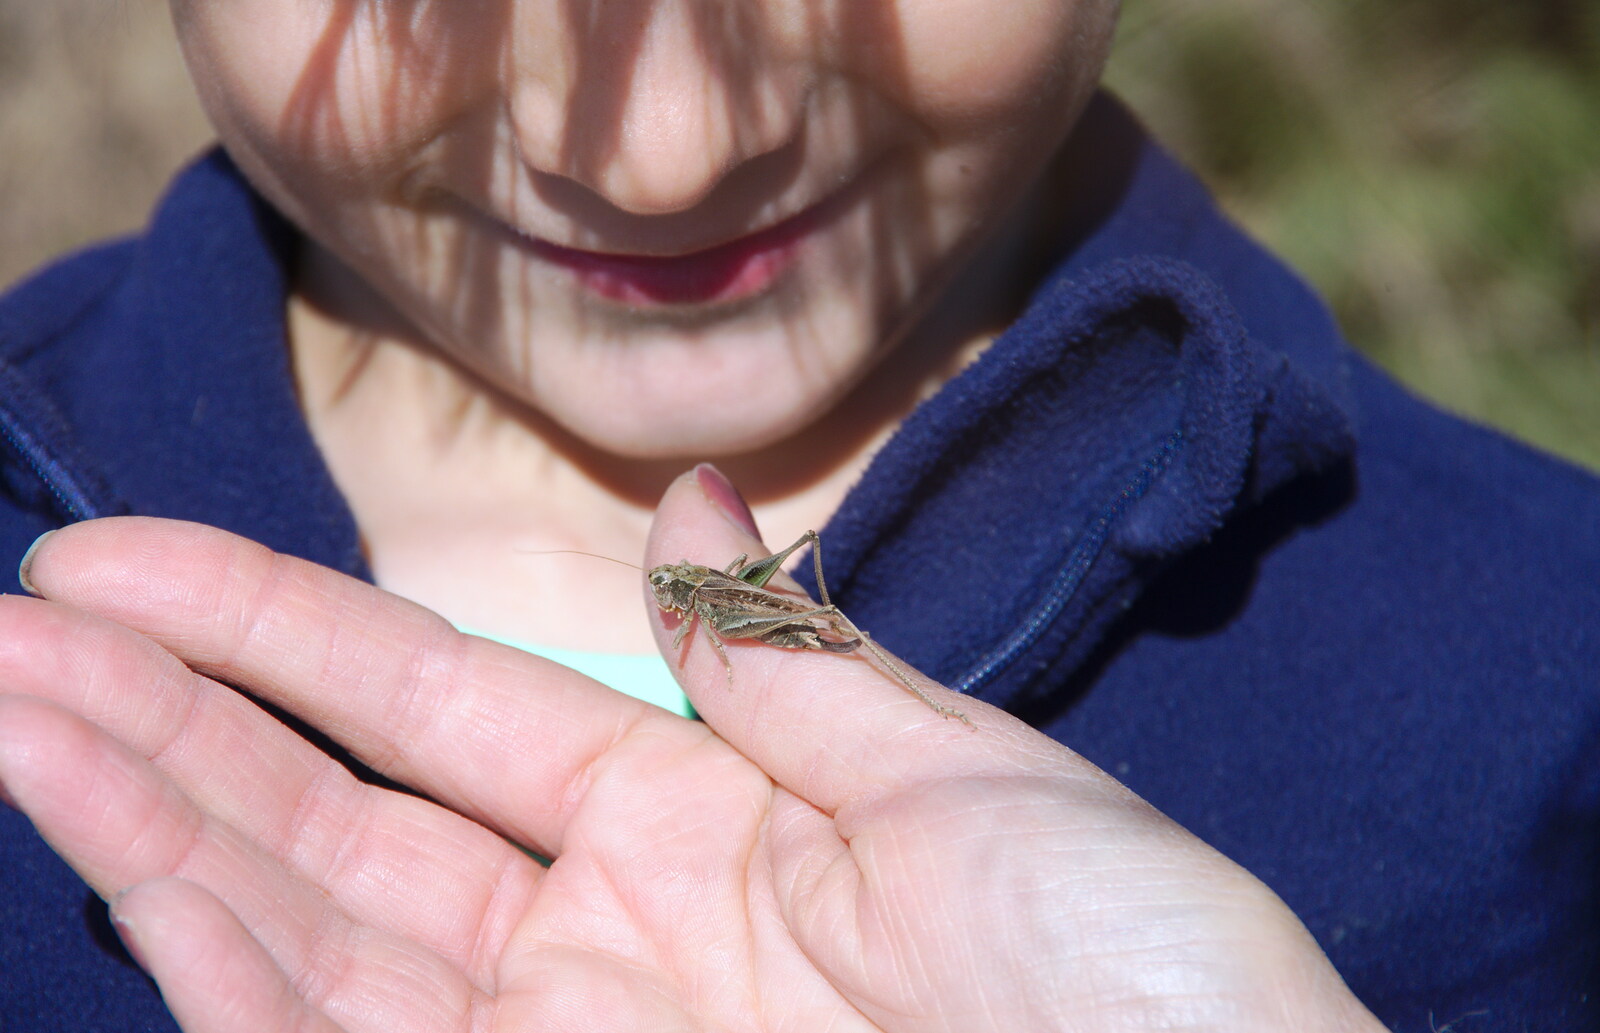 Harry has a close-up look at a grasshopper from A Trip to the South Coast, Highcliffe, Dorset - 20th September 2019